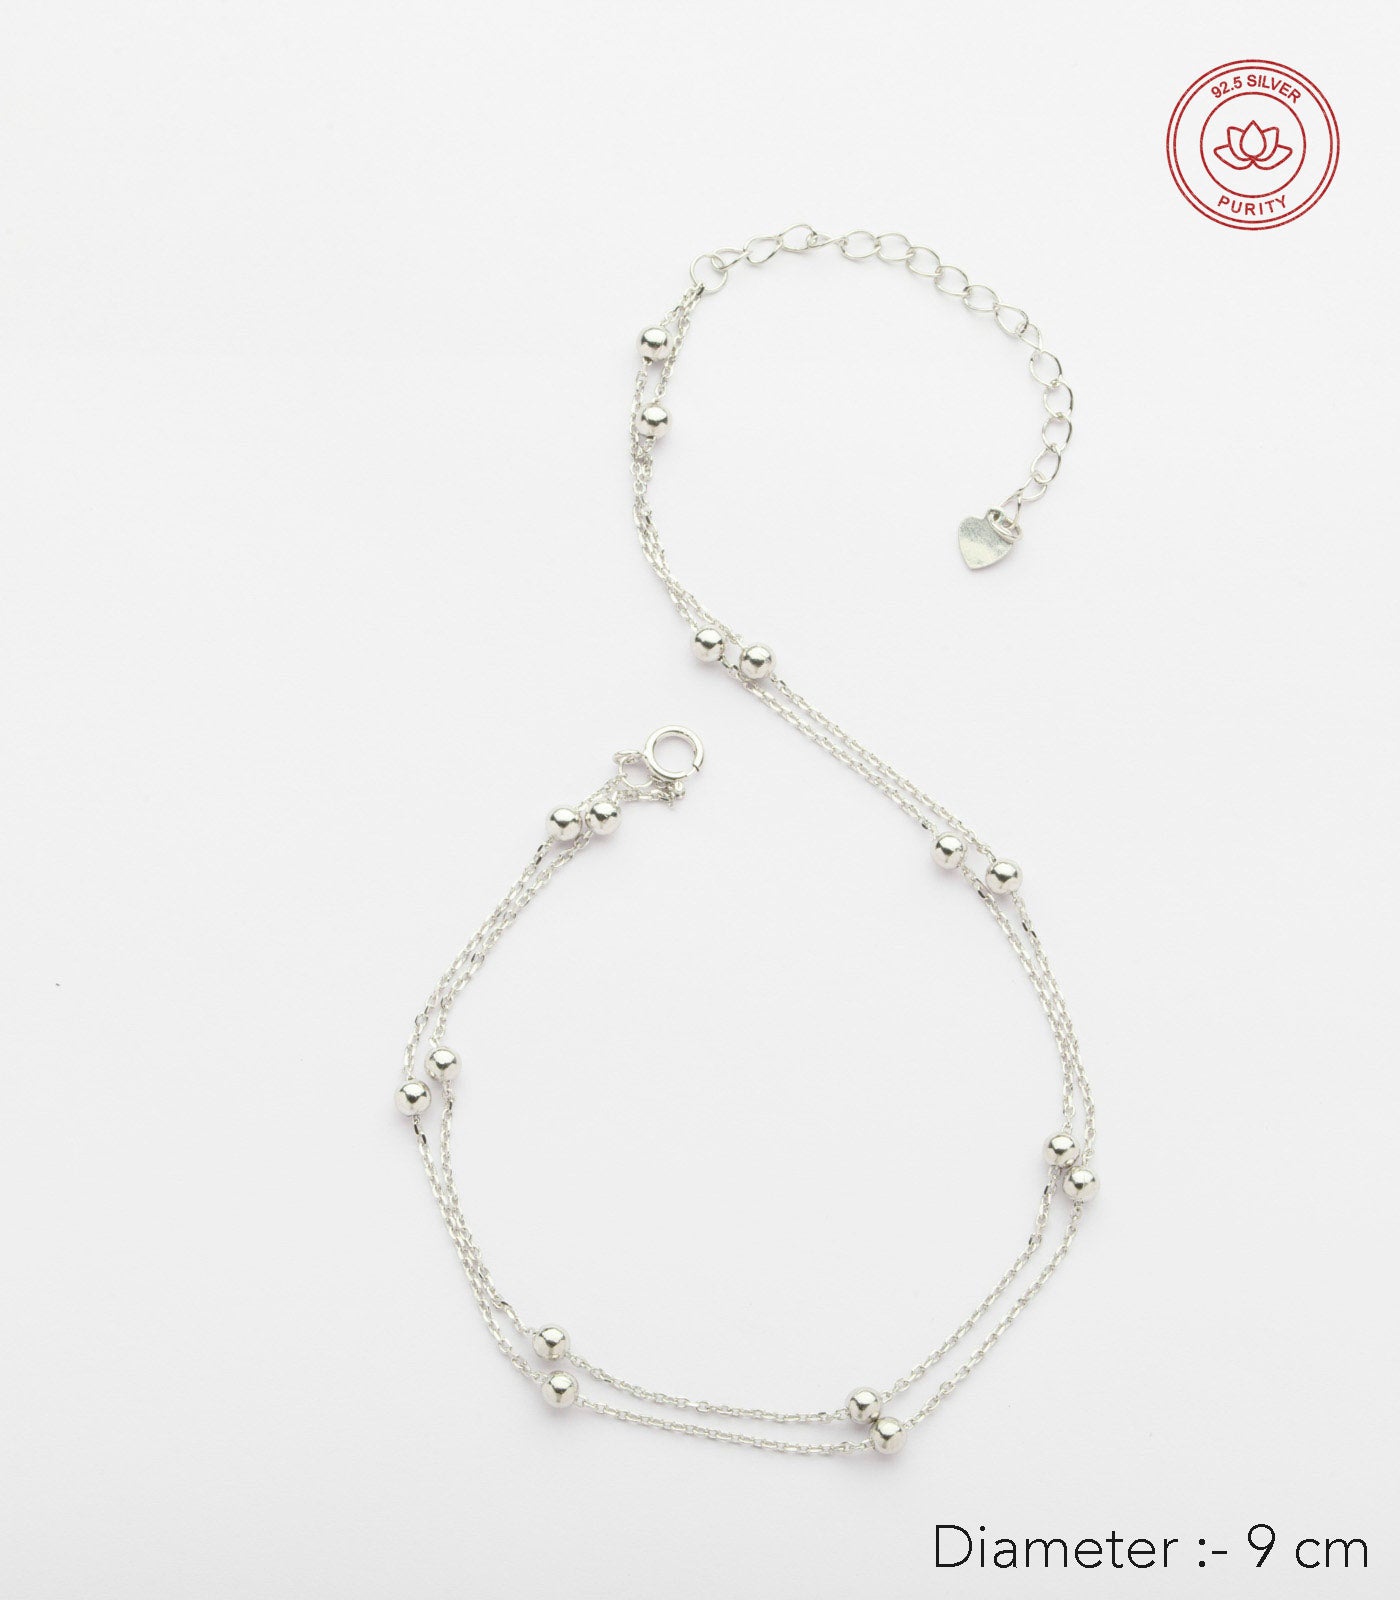 Delicate String Of Silver Balls Anklet (Silver)